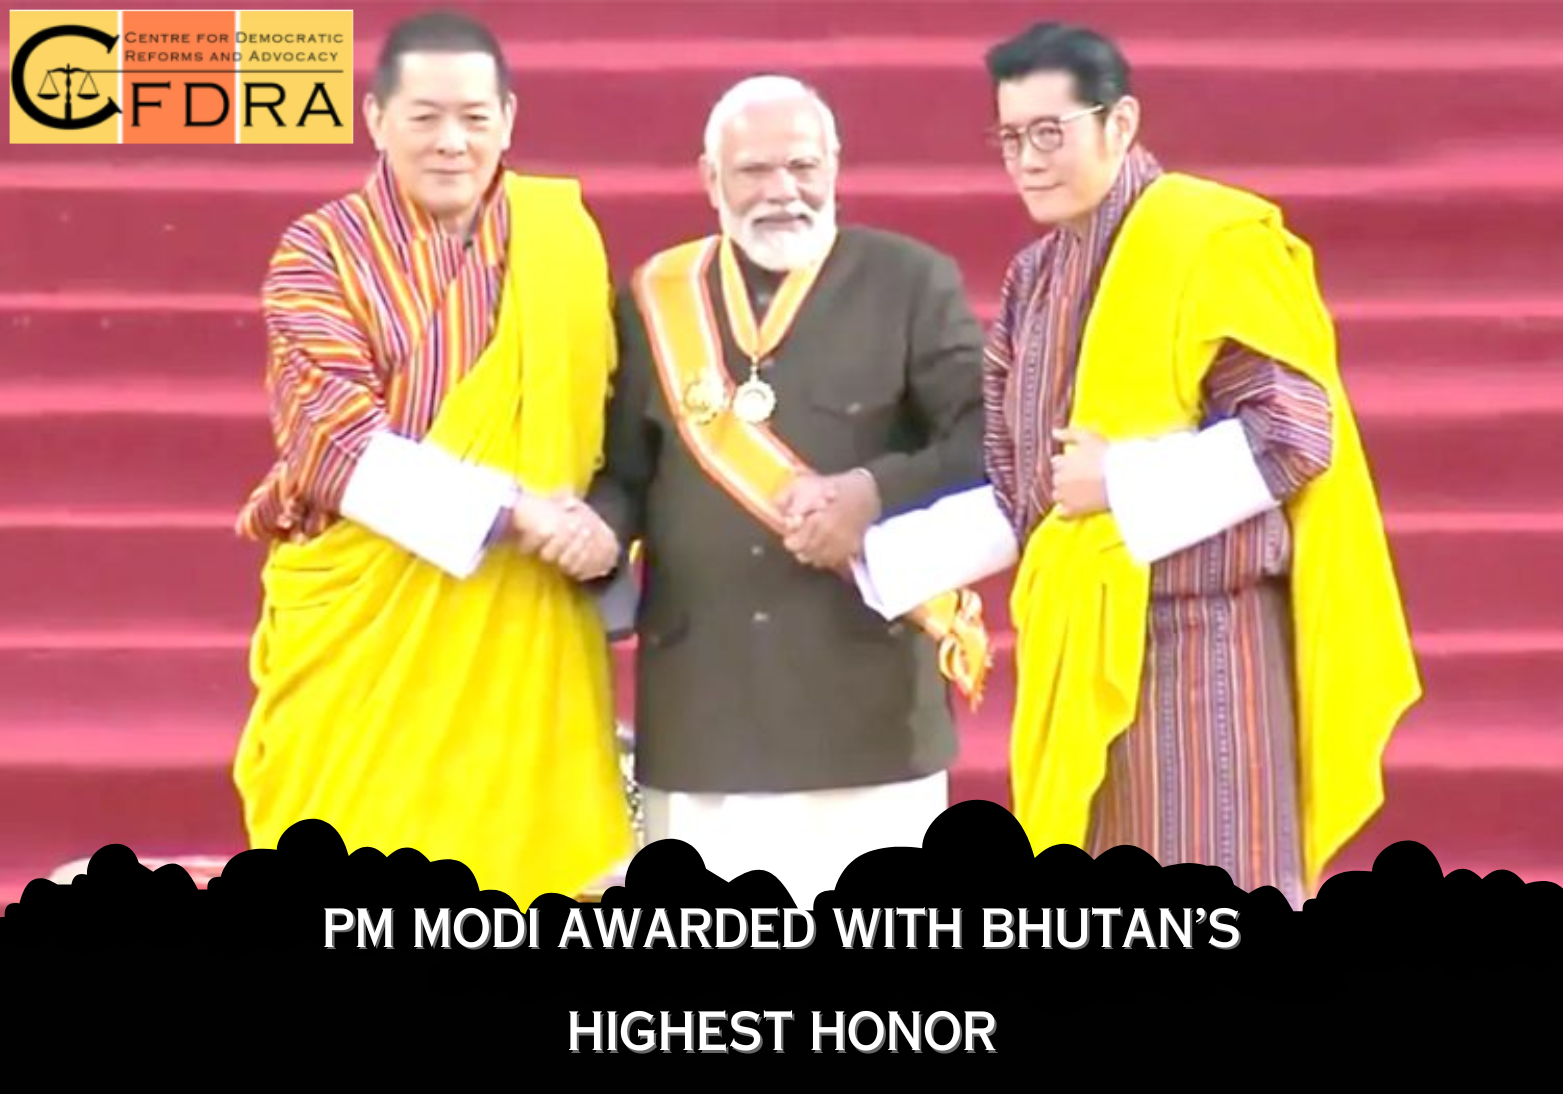 PM Modi Accepts Bhutan’s Most noteworthy Regular citizen Honor: A Demonstration of Respective Relations